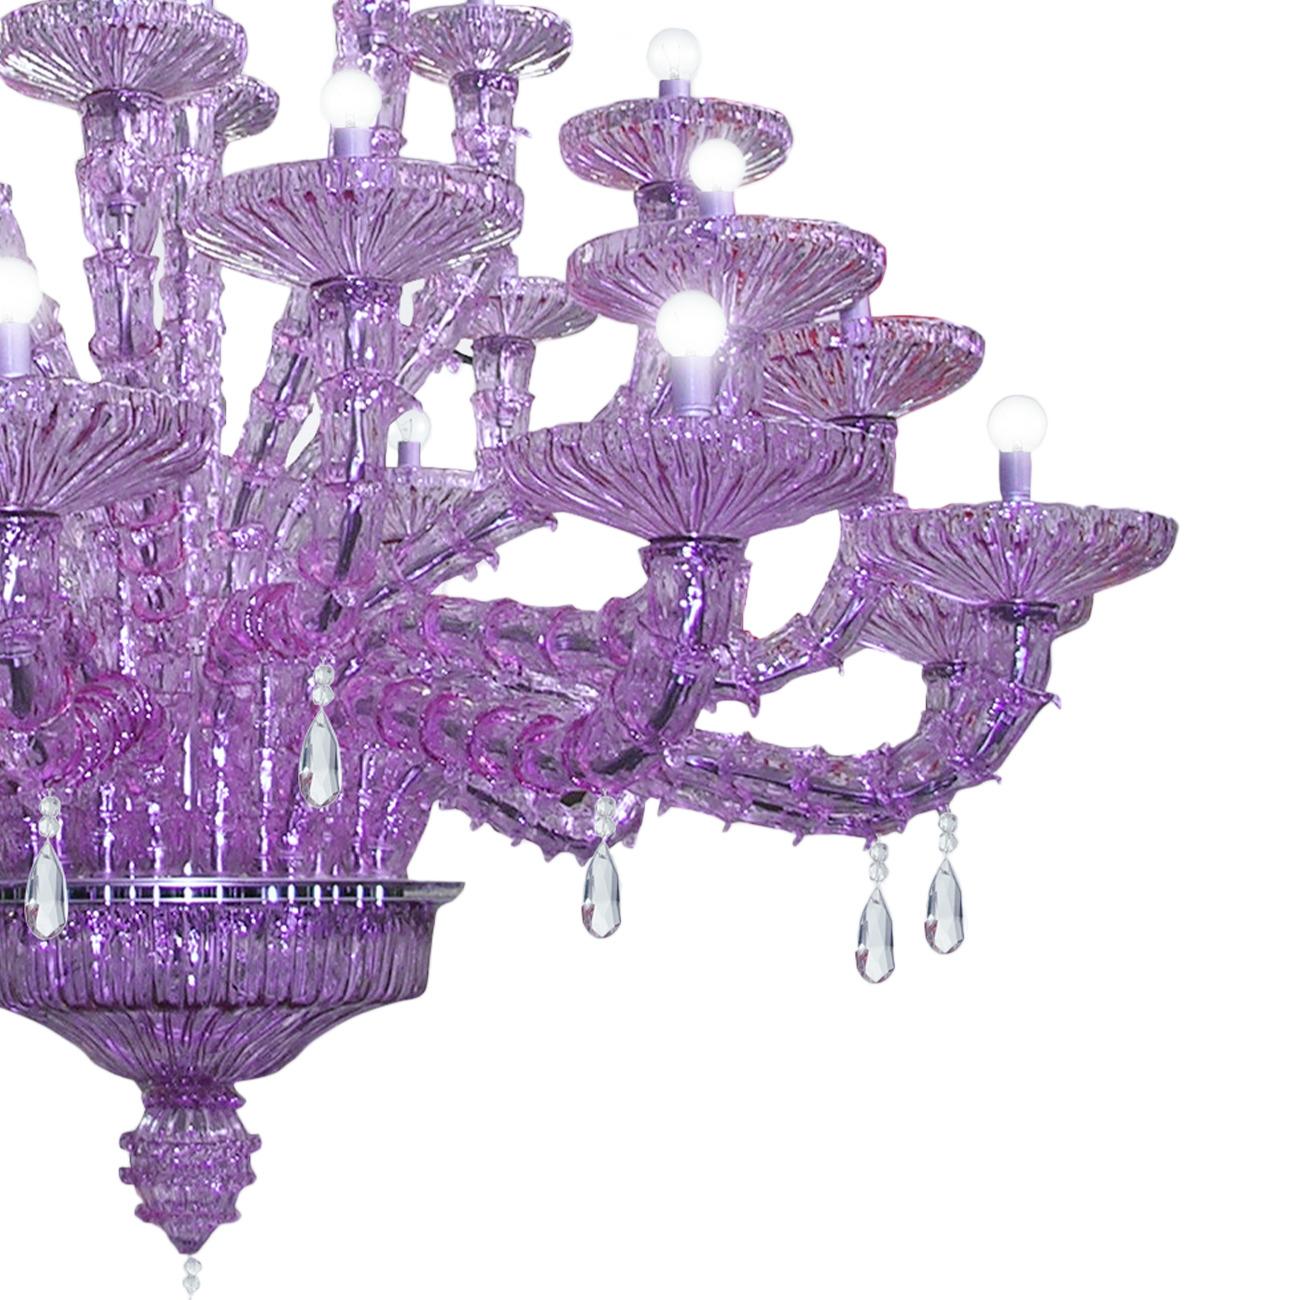 Artistic handmade Murano glass chandelier glamour by La Murrina, blowed in our furnace in Murano - Venice following the ancient glassmaster's art.

Additional information:
- Material: Murano glass
- Hardware finishing: Chrome 
- Dimensions: H